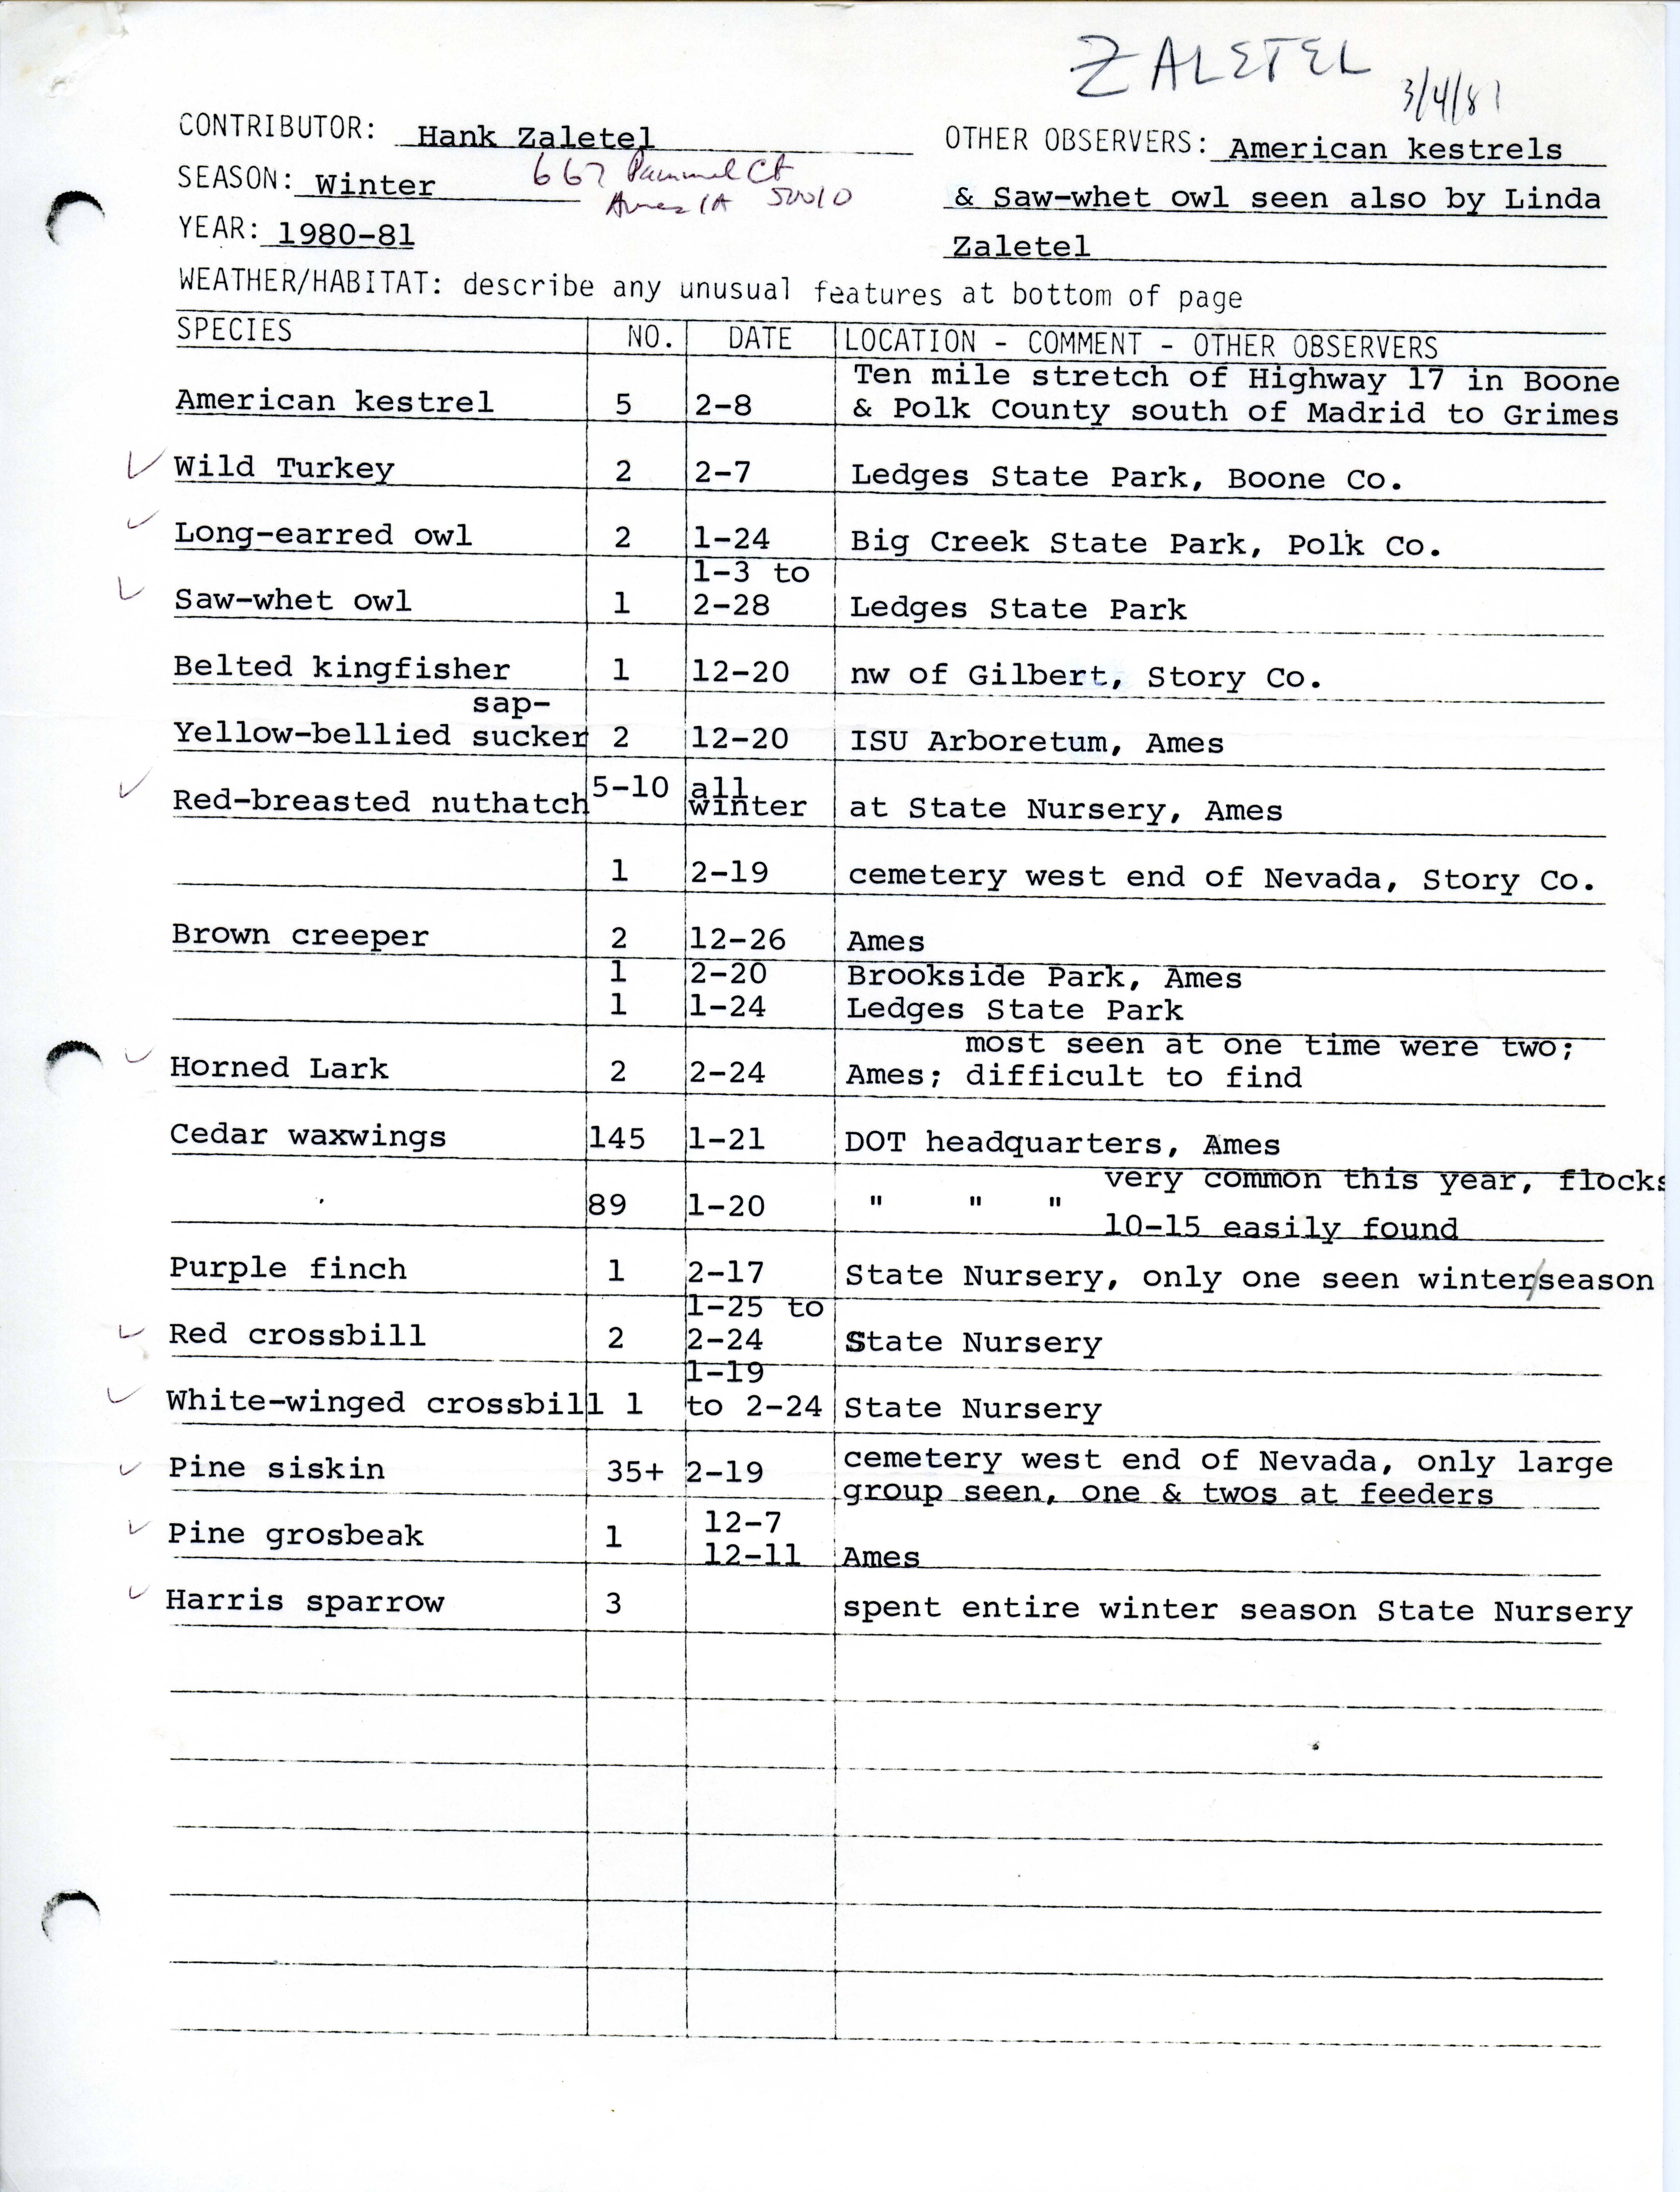 Annotated bird sighting list for Winter 1981 compiled by Hank Zaletel